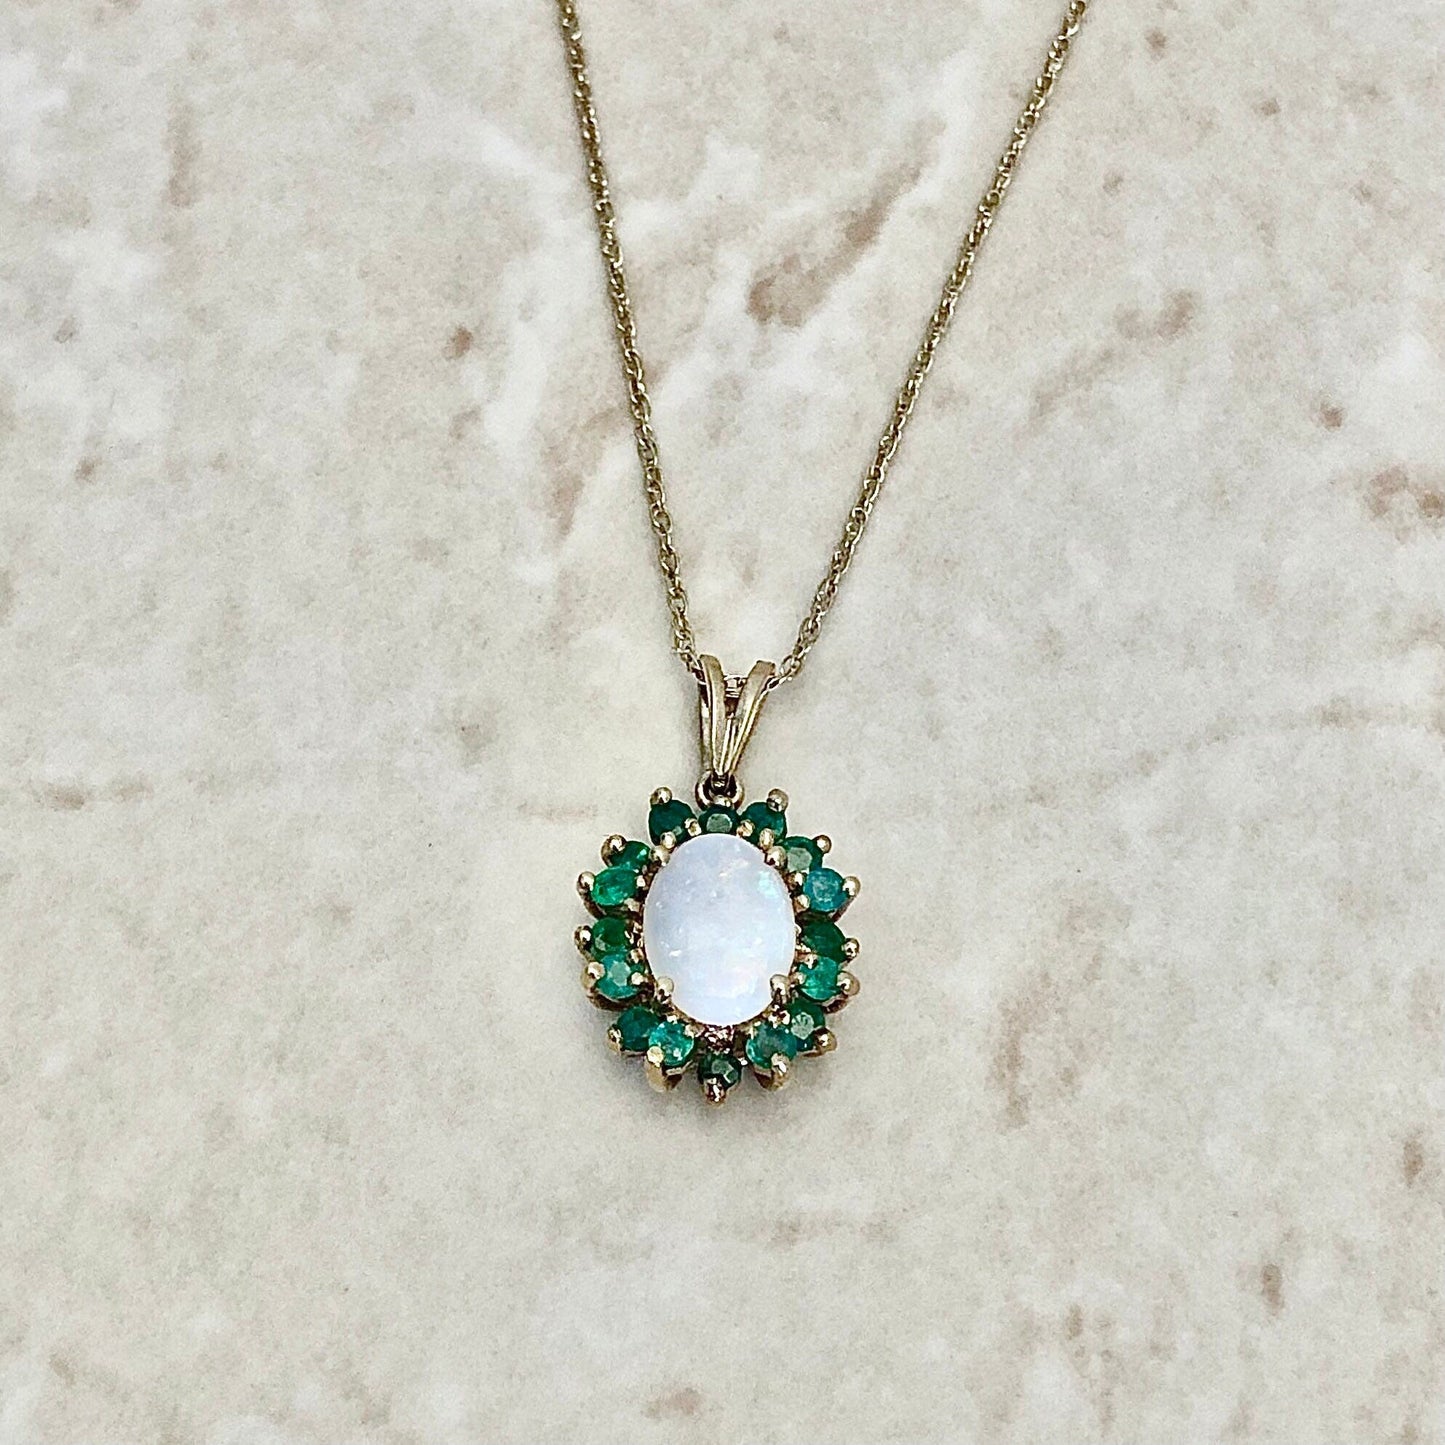 Natural Opal & Emerald Pendant Necklace - 10K Yellow Gold - May And October Birthstone - Birthday Gift For Her